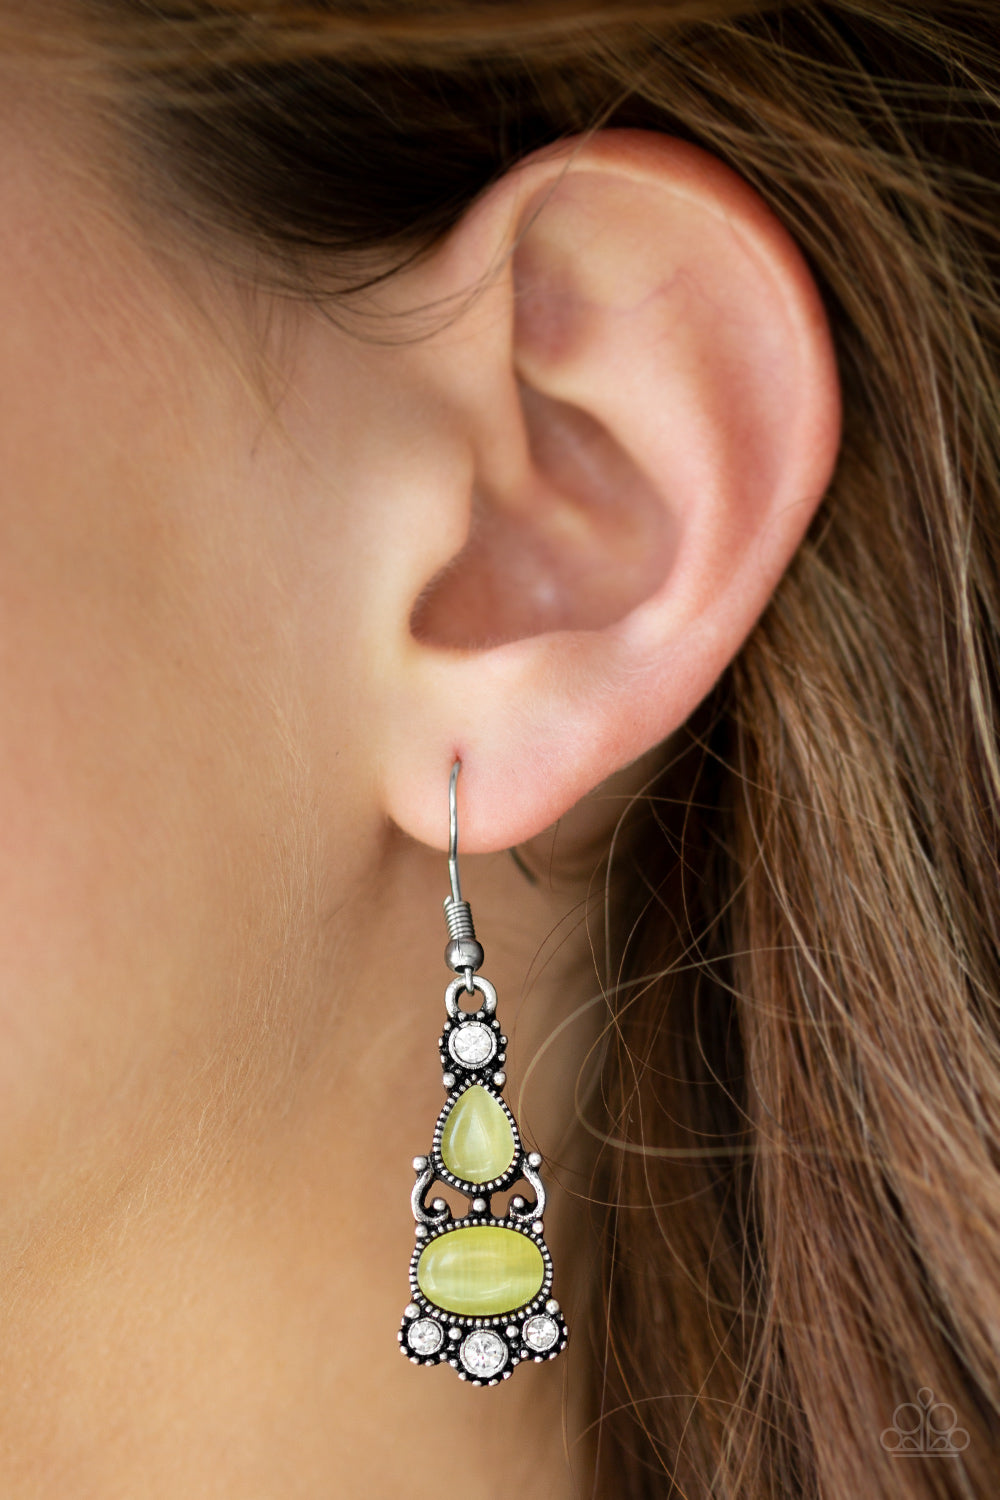 PUSH YOUR LUXE - YELLOW MOONSTONE DAINTY EARRINGS